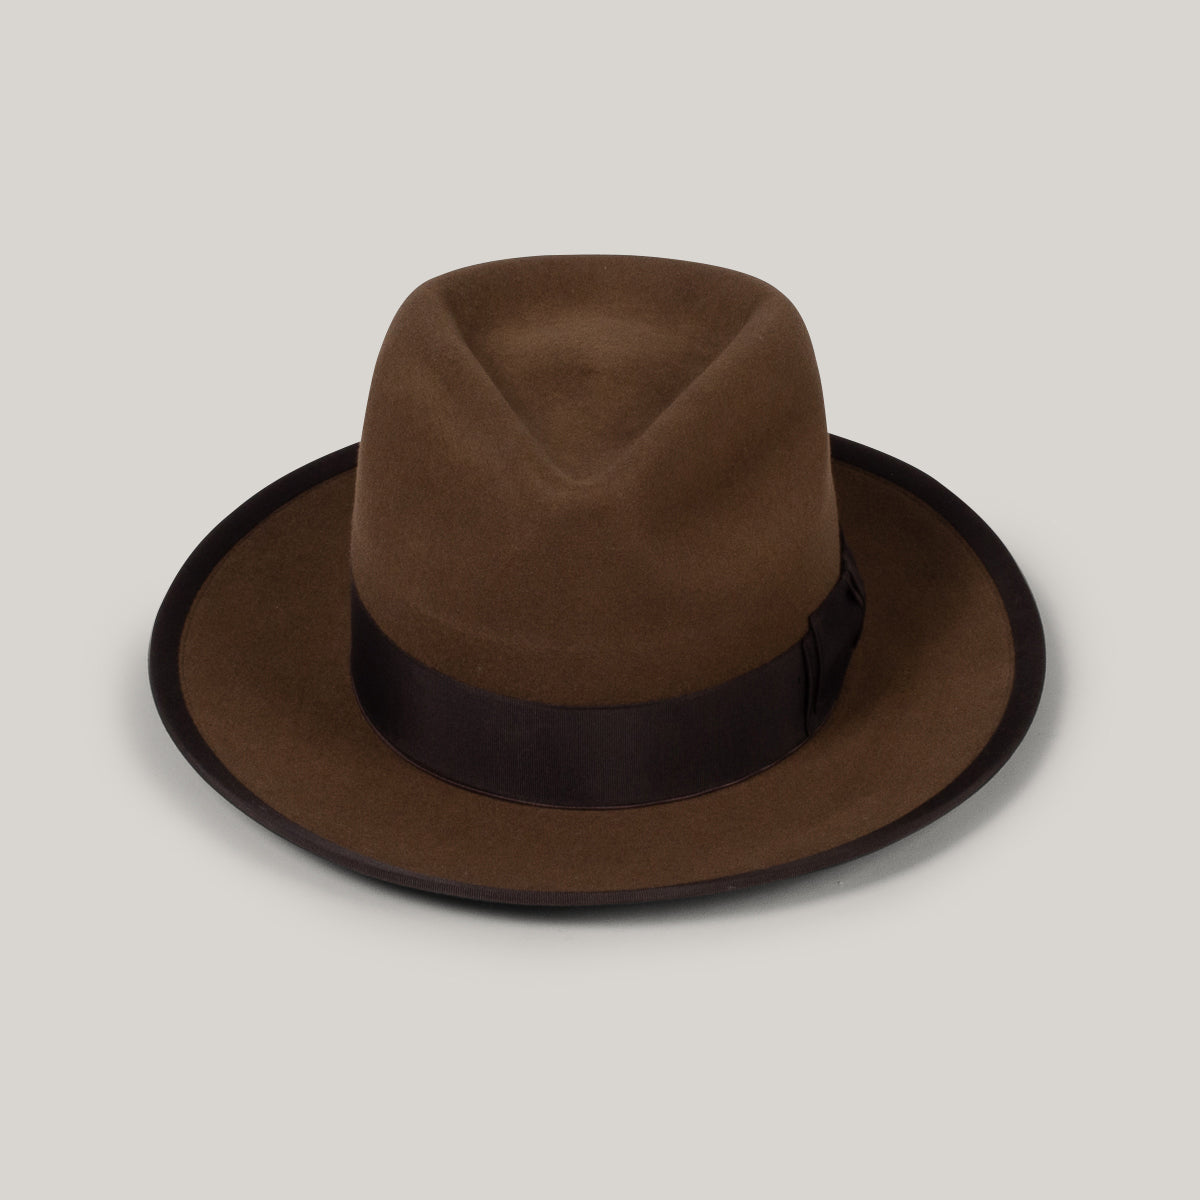 H.W. DOG & CO. POINT-H HAT - BROWN – Pickings and Parry